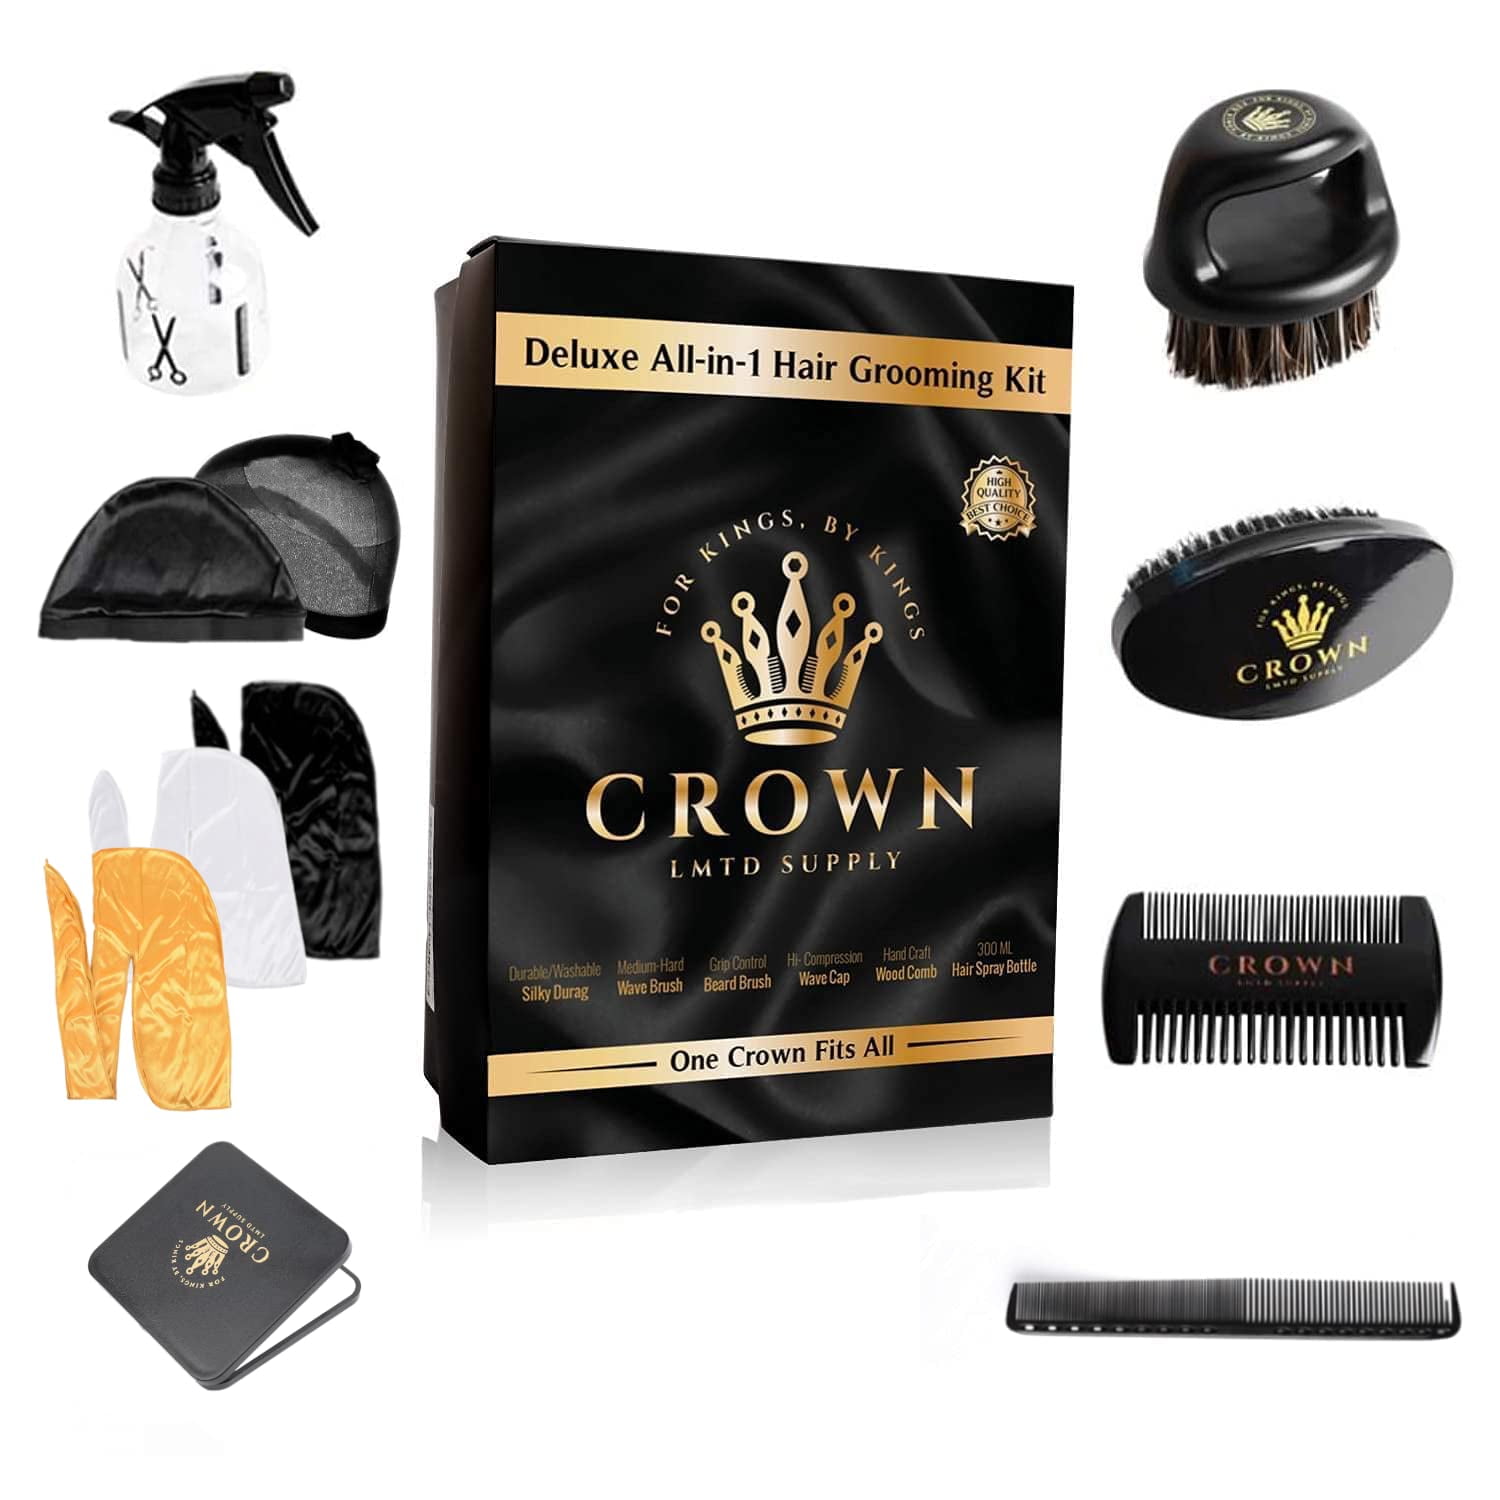  Himoswis 360 Wave Brush for Men 360 and Silky Durags Set for  Men,Medium Hard Waves Brush Kit with Durag for Men Waves Hair+Crown Patch  for Waves,4 in 1 360 Wave